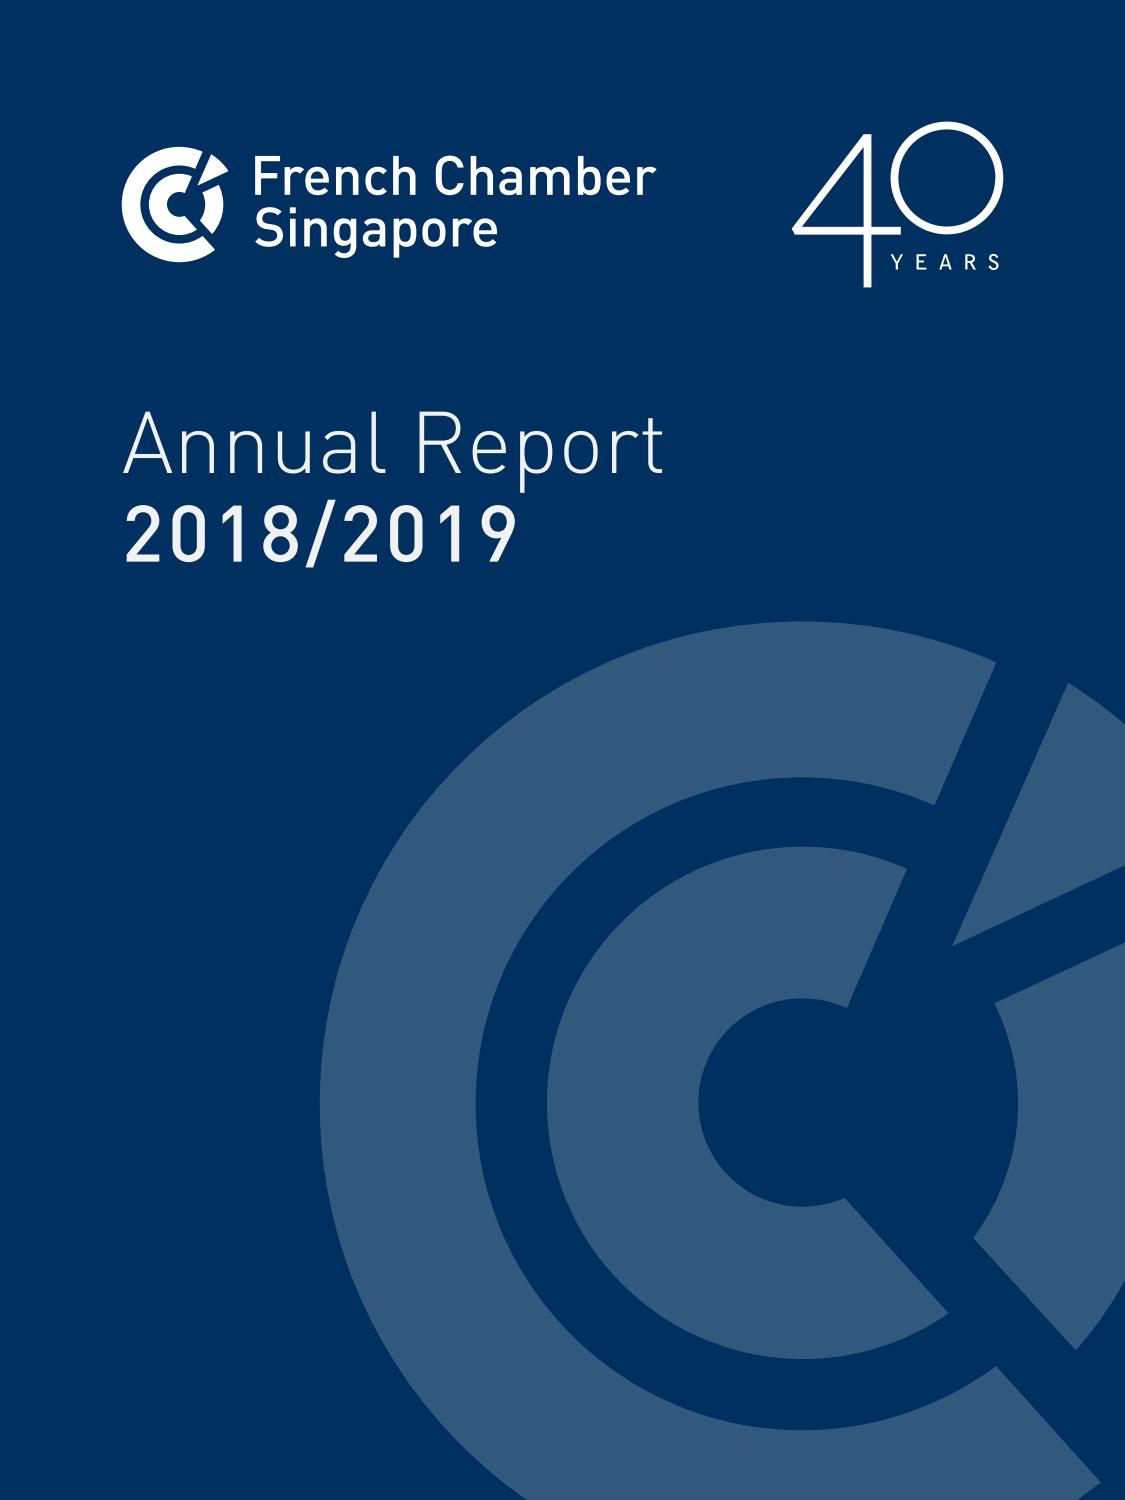 Table De Jardin Design Génial French Chamber Singapore Annual Report 2018 2019 by the